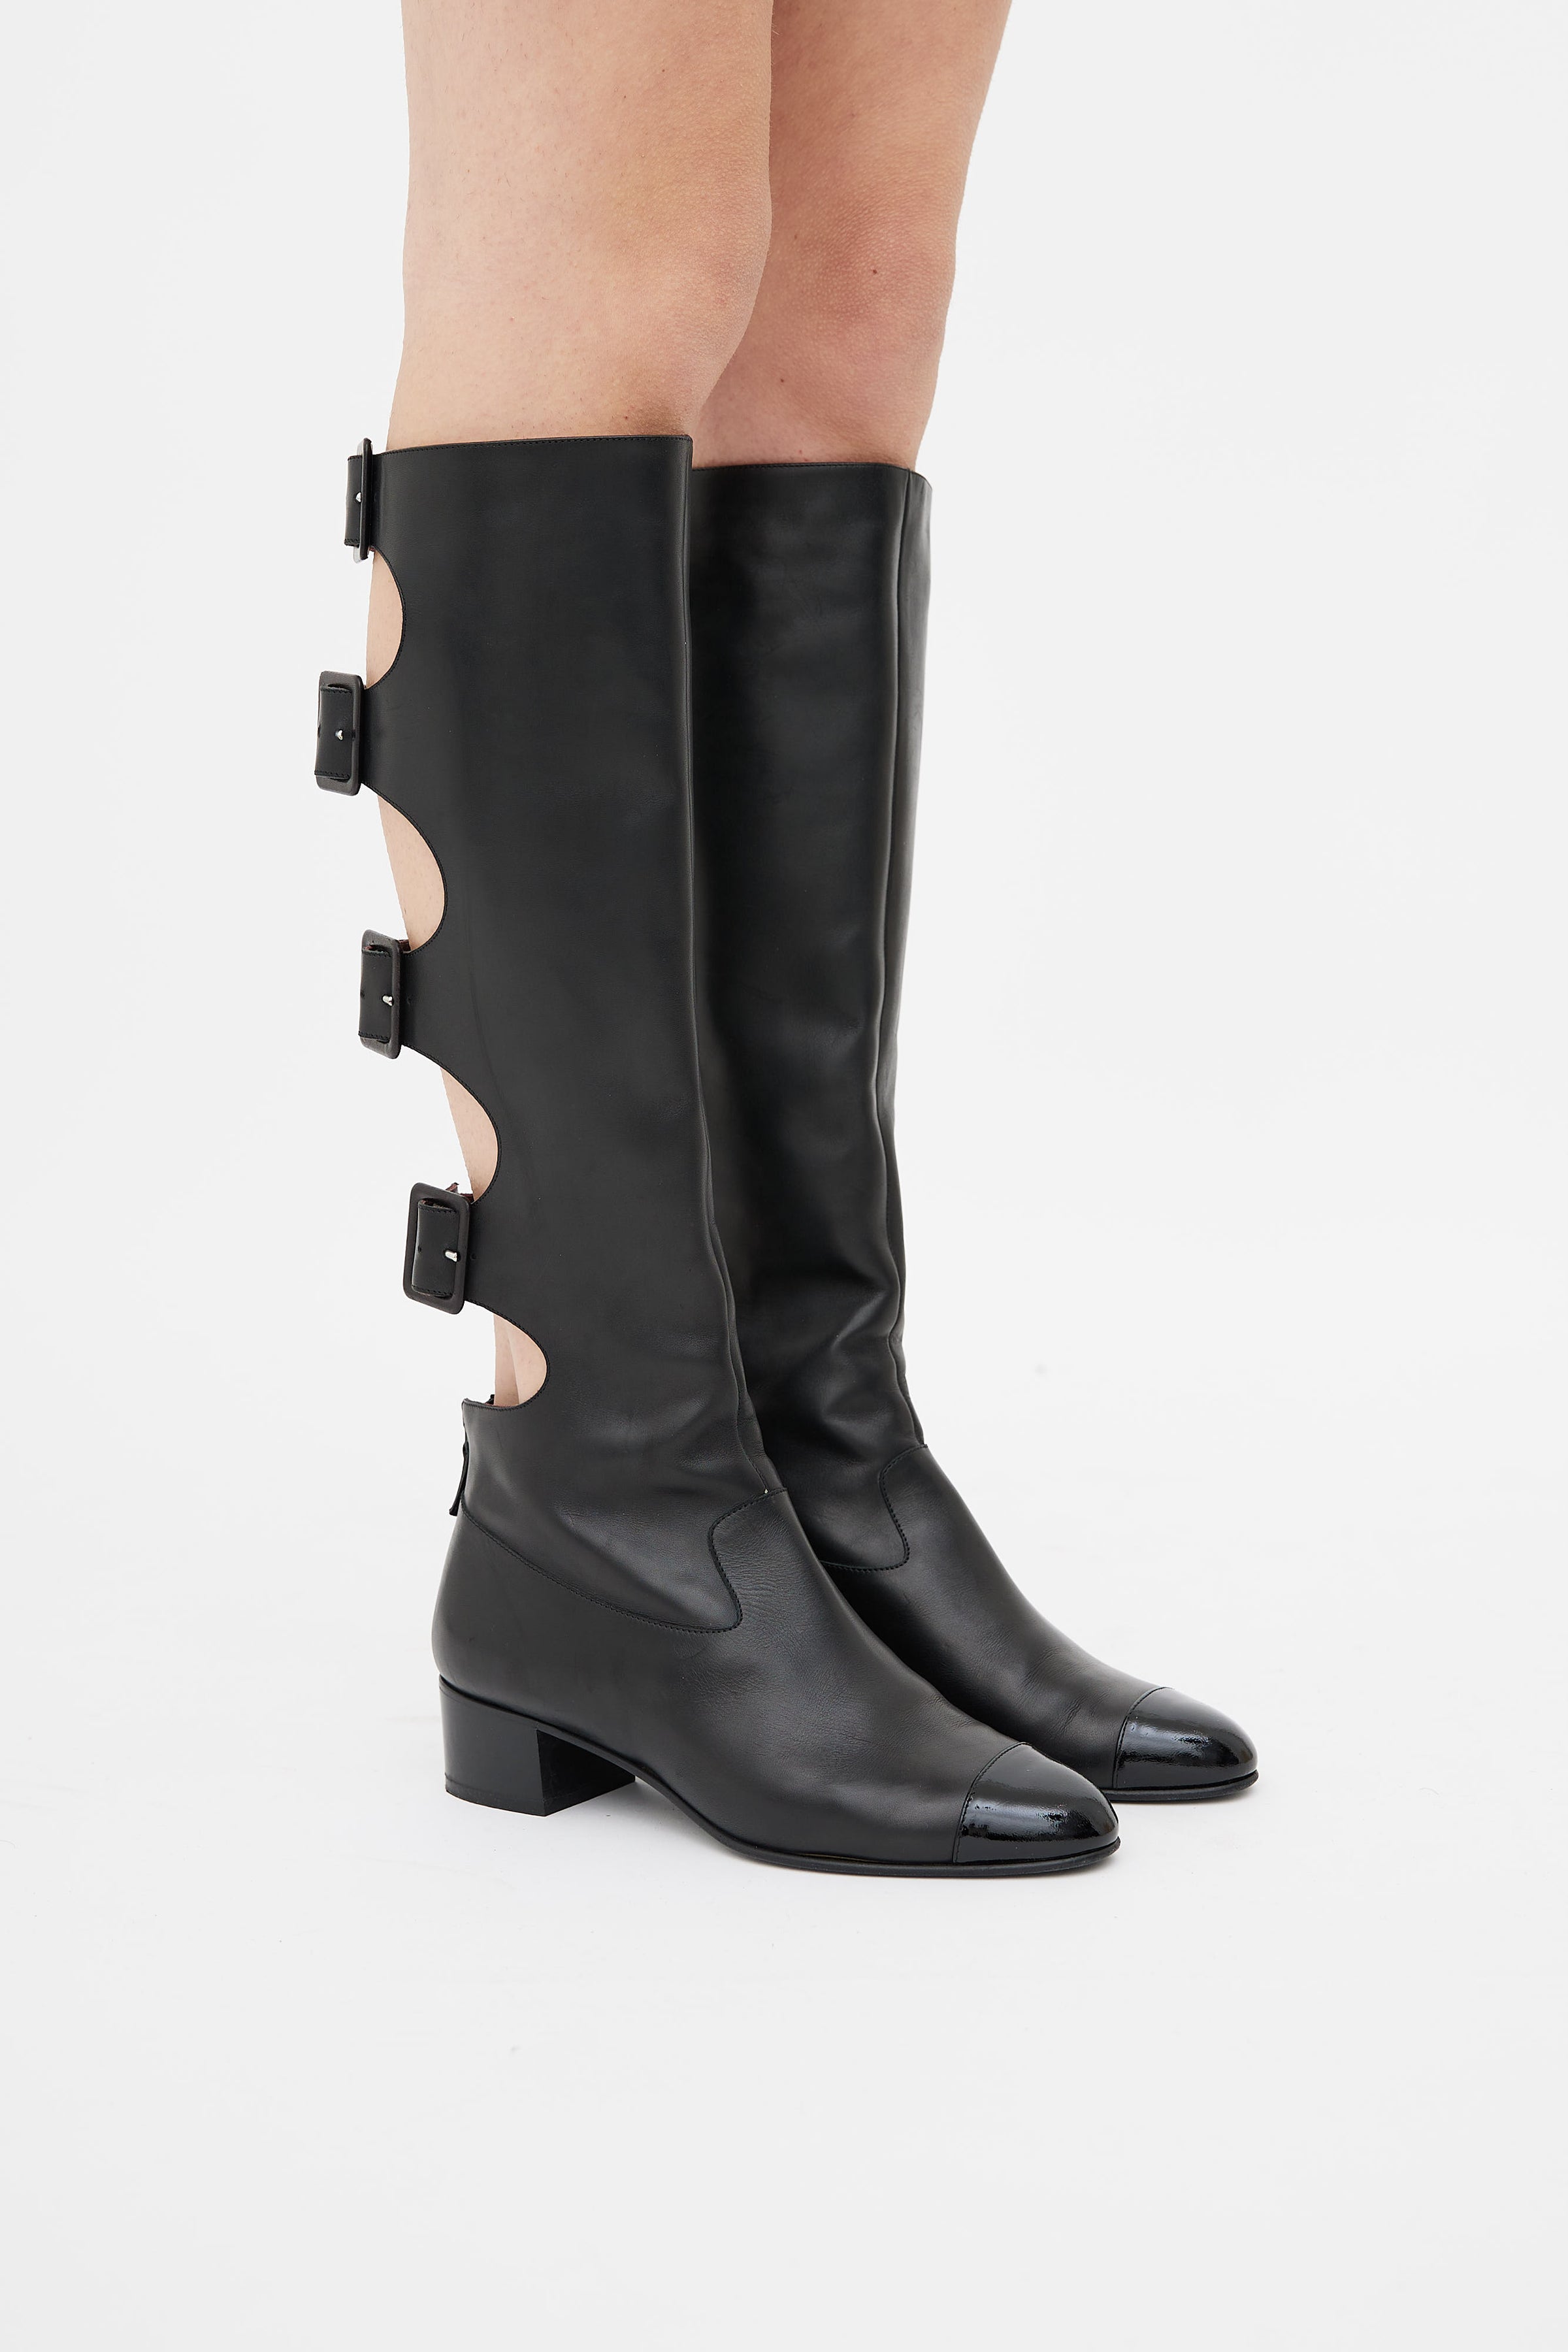 Chanel Black Leather Cap Toe Knee High Boots  Consign Chanel Canada